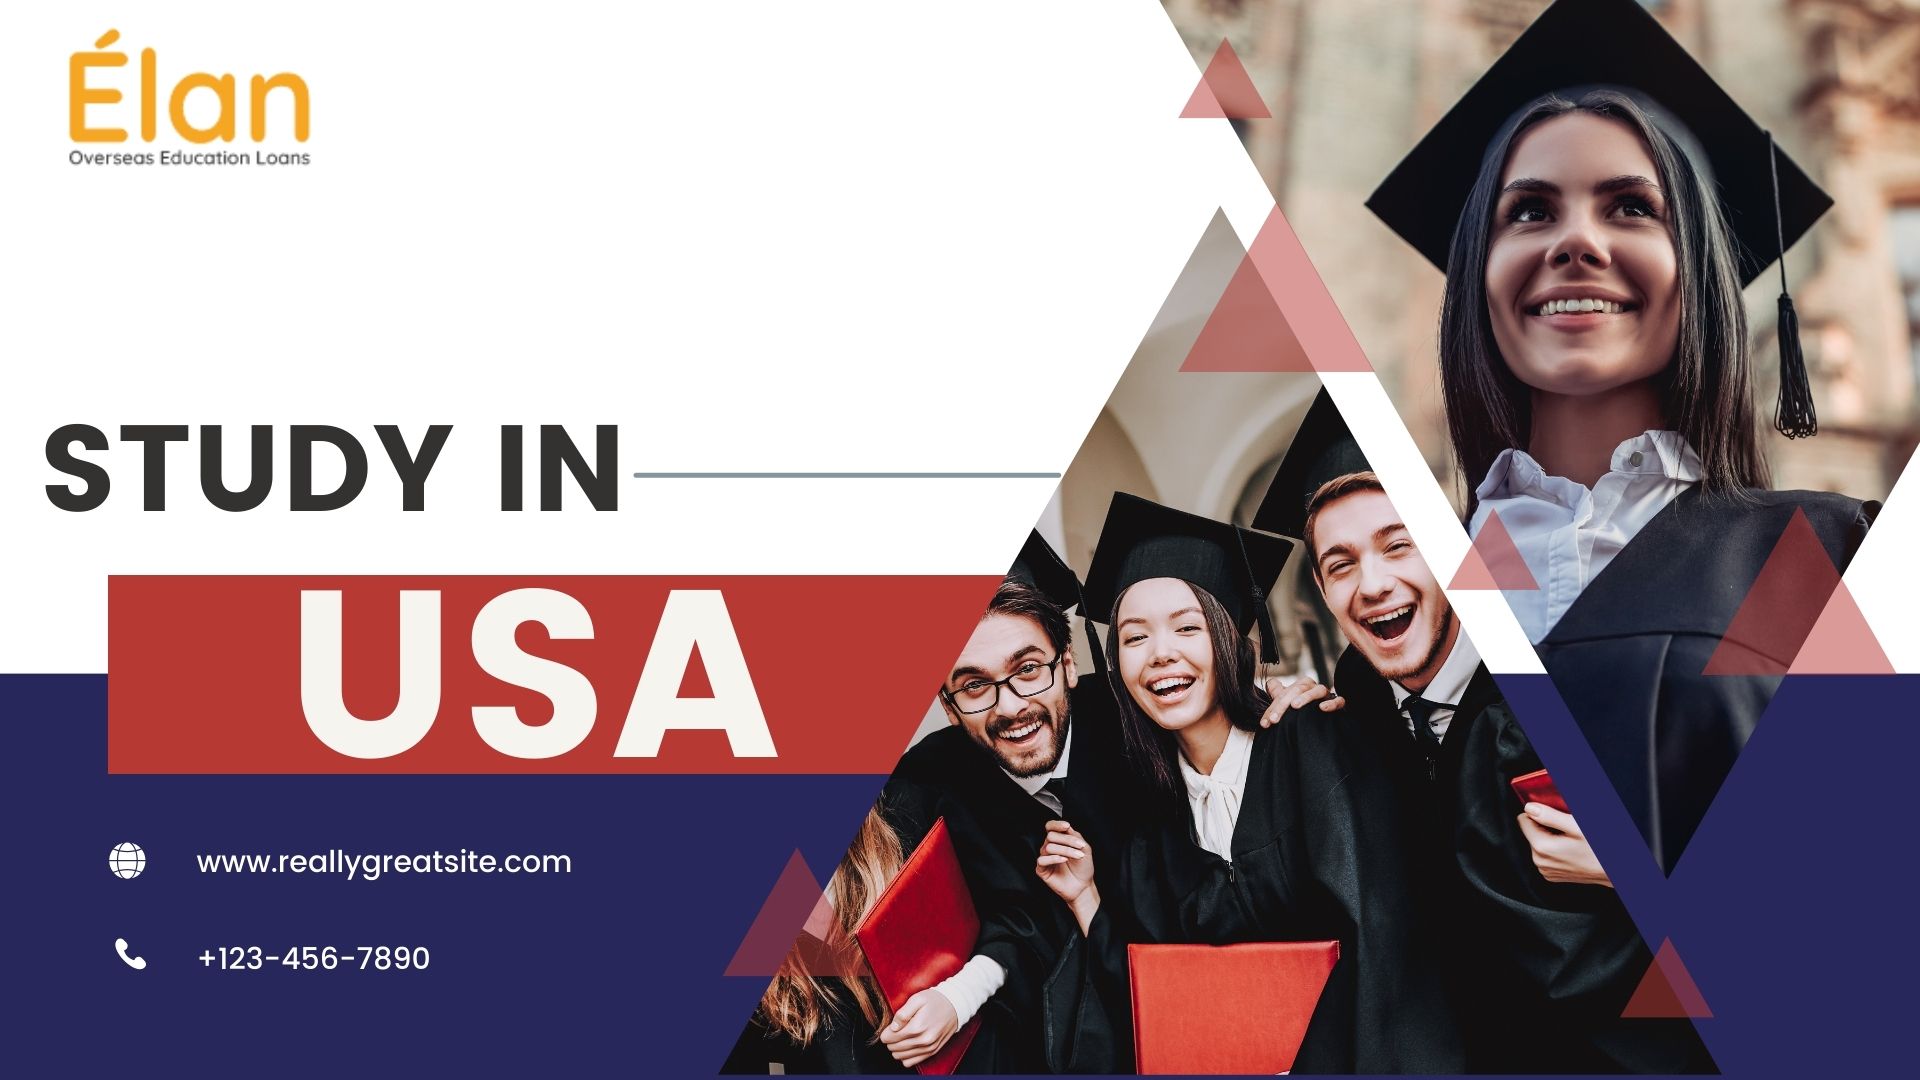 education loan to study in USA